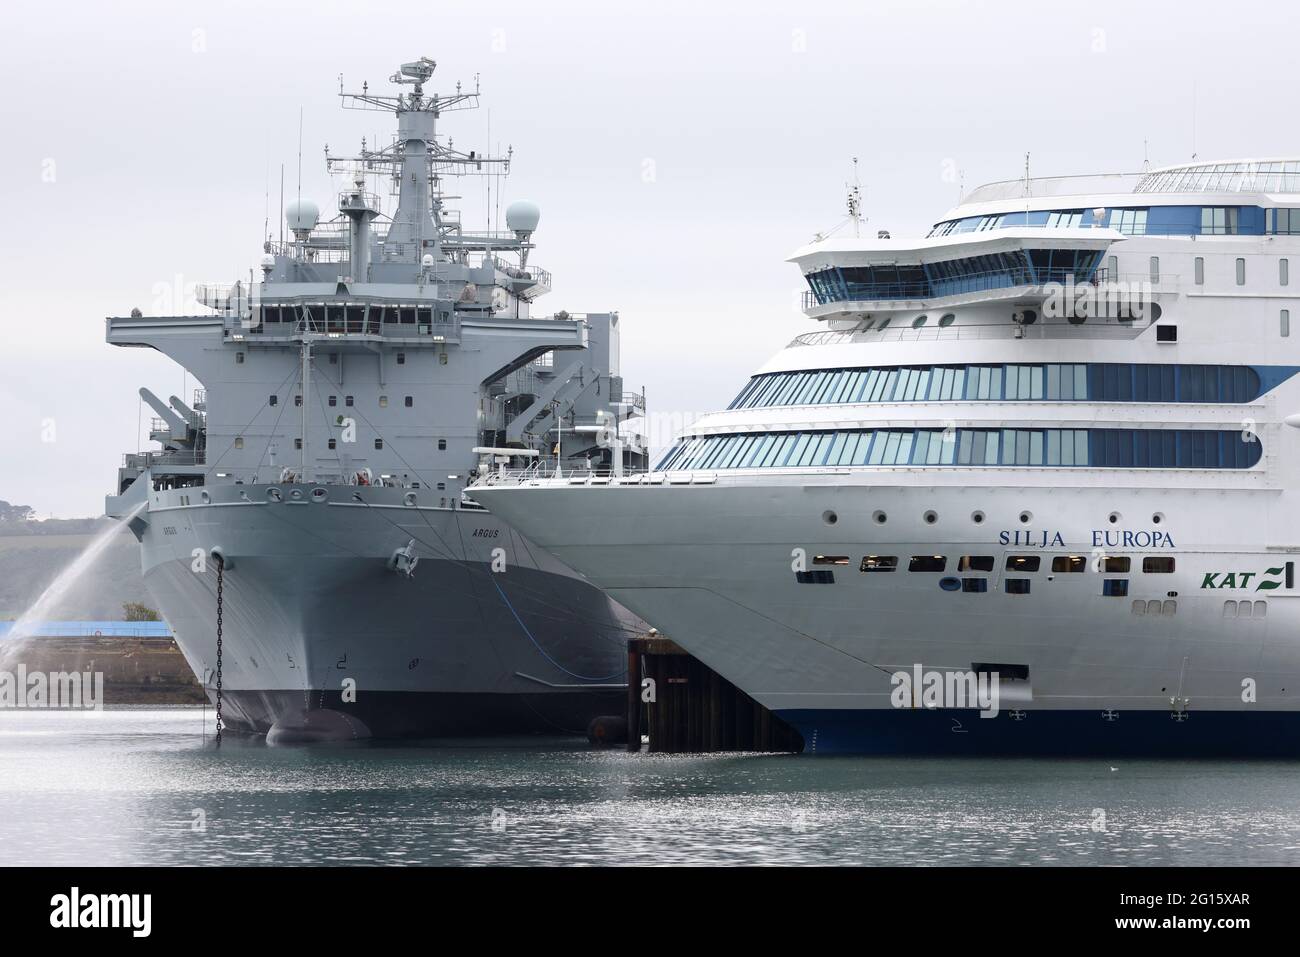 The cruise liner 'Silja Europa' which will host police officers during the G7 summit is docked in Falmouth Harbour, Cornwall, Britain, June 5, 2021. REUTERS/Tom Nicholson Stock Photo